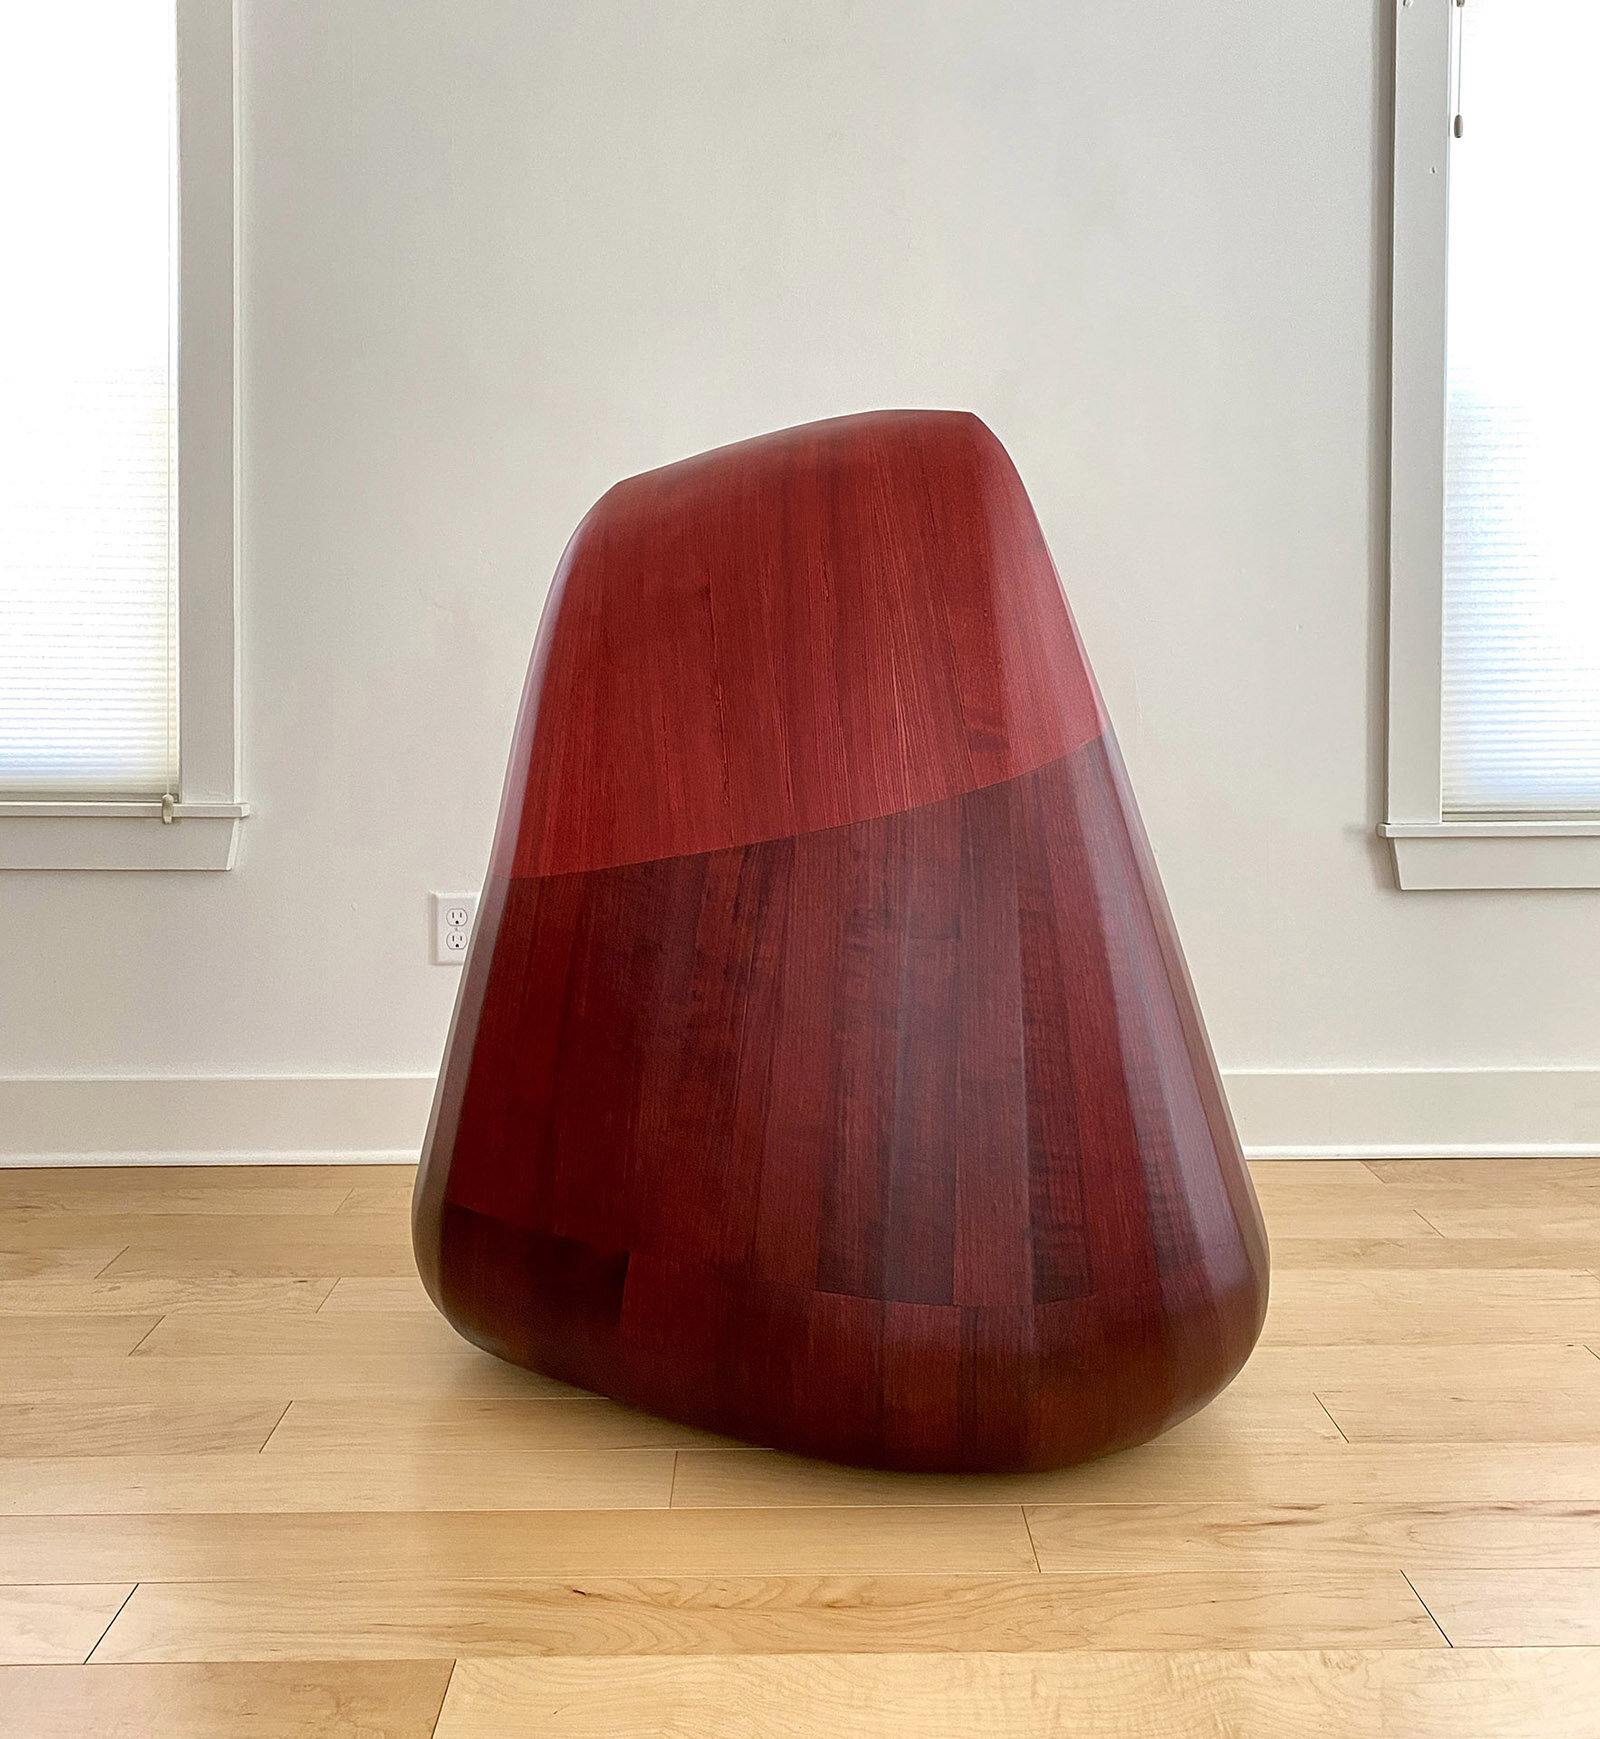  Steve Bartlett (United States, born 1961),  Mostly Modest,&nbsp; 2020, stained and varnished wood, 45 x 39 x 28 inches, Courtesy of the artist&nbsp; 